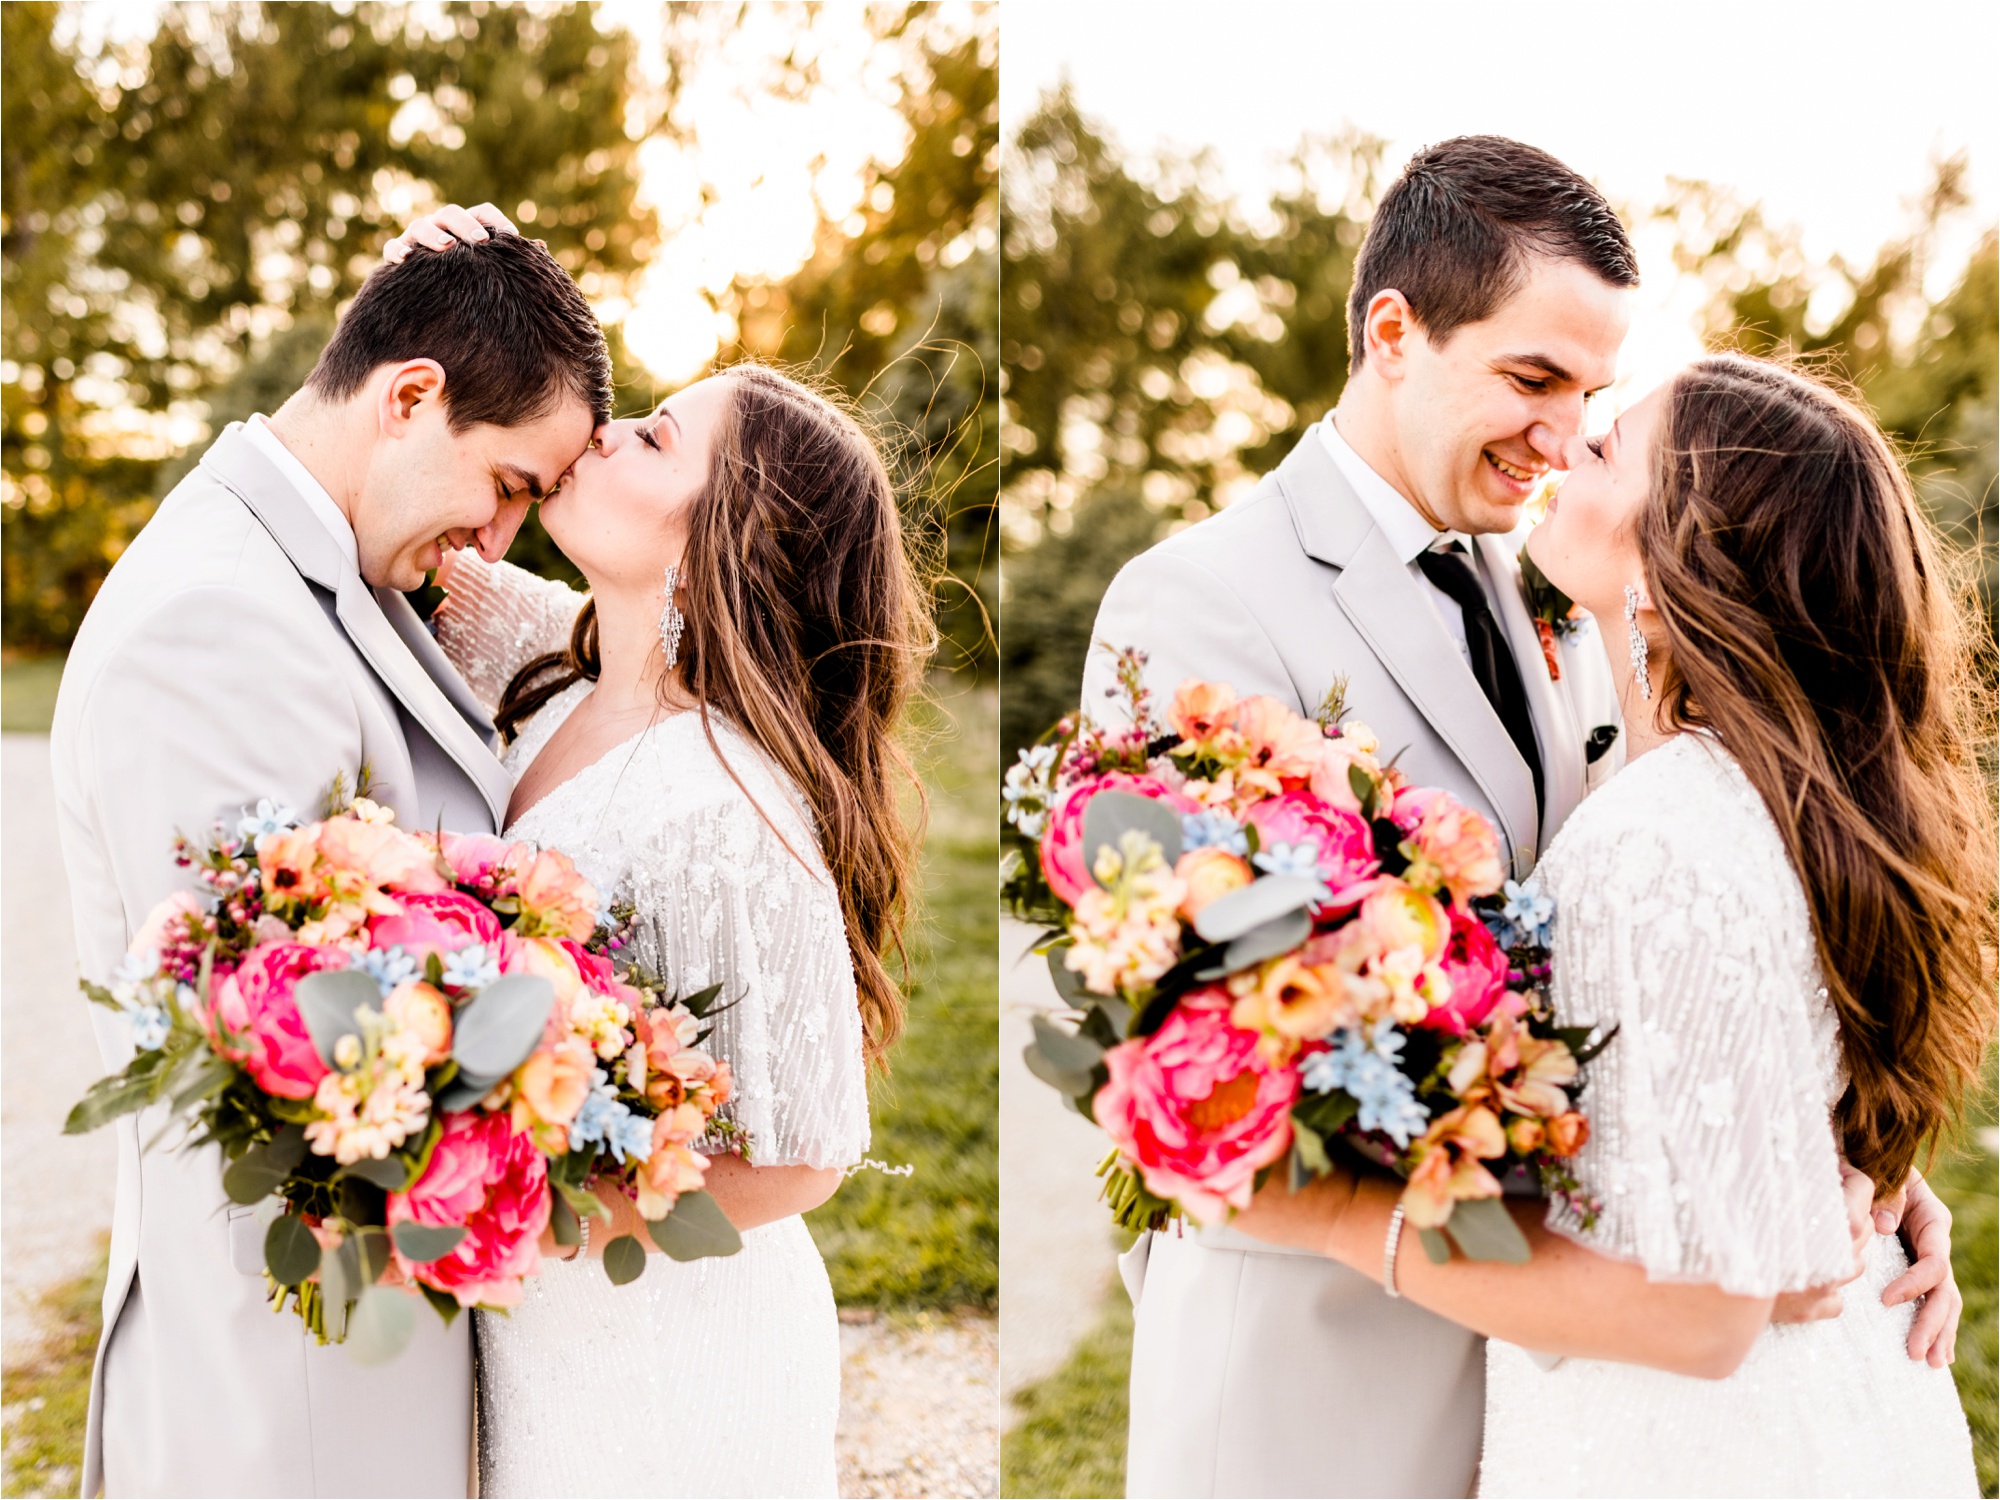 Caitlin and Luke Photography, Illinois Wedding Photographers, Champaign Wedding Photographers, Bloomington Normal Wedding Photographers, Romantic Red and Pink Sunset Styled Shoot_9585.jpg